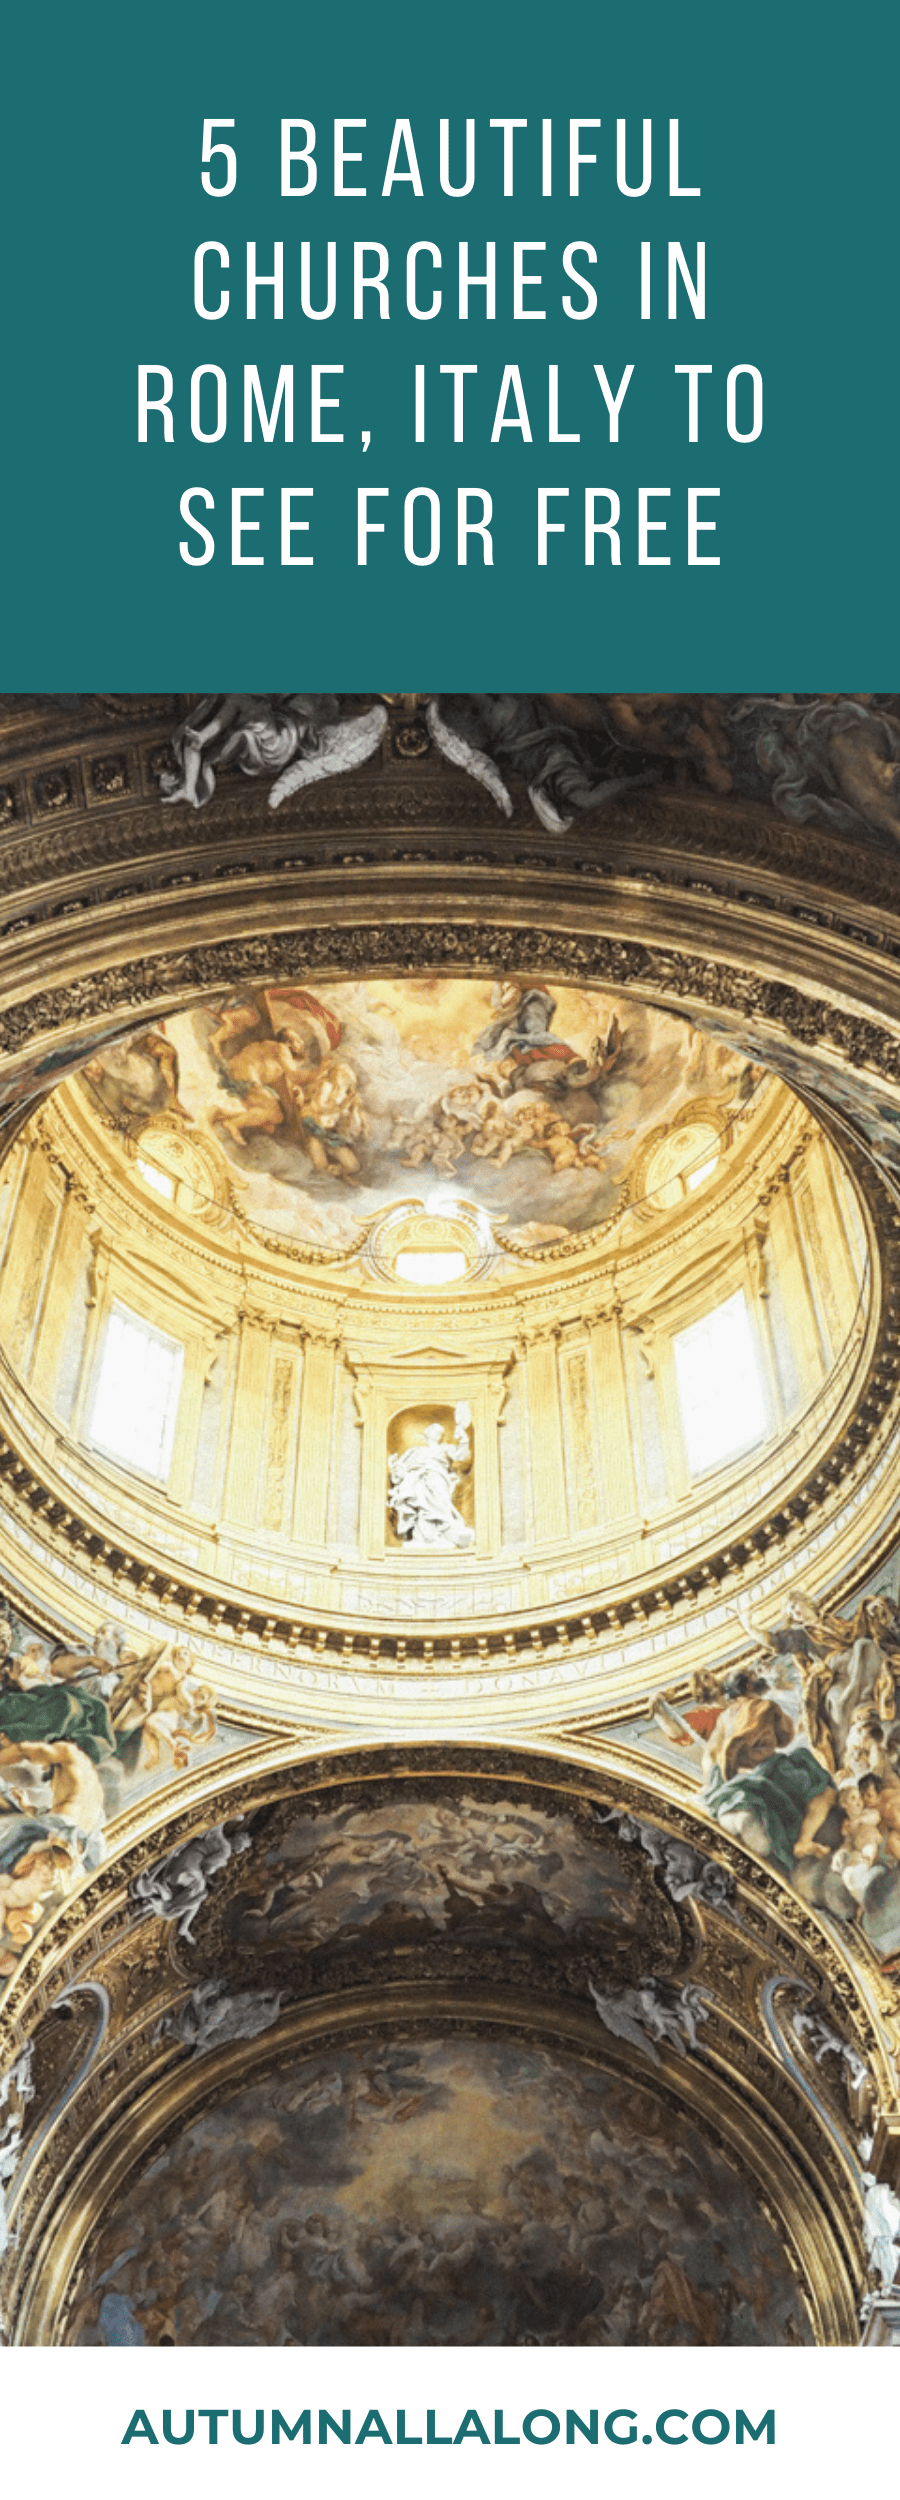 Rome, Italy is full of beautiful art and you can see most of it for free visiting churches! This is a photo tour of 5 churches we visited for free. | via Autumn All Along